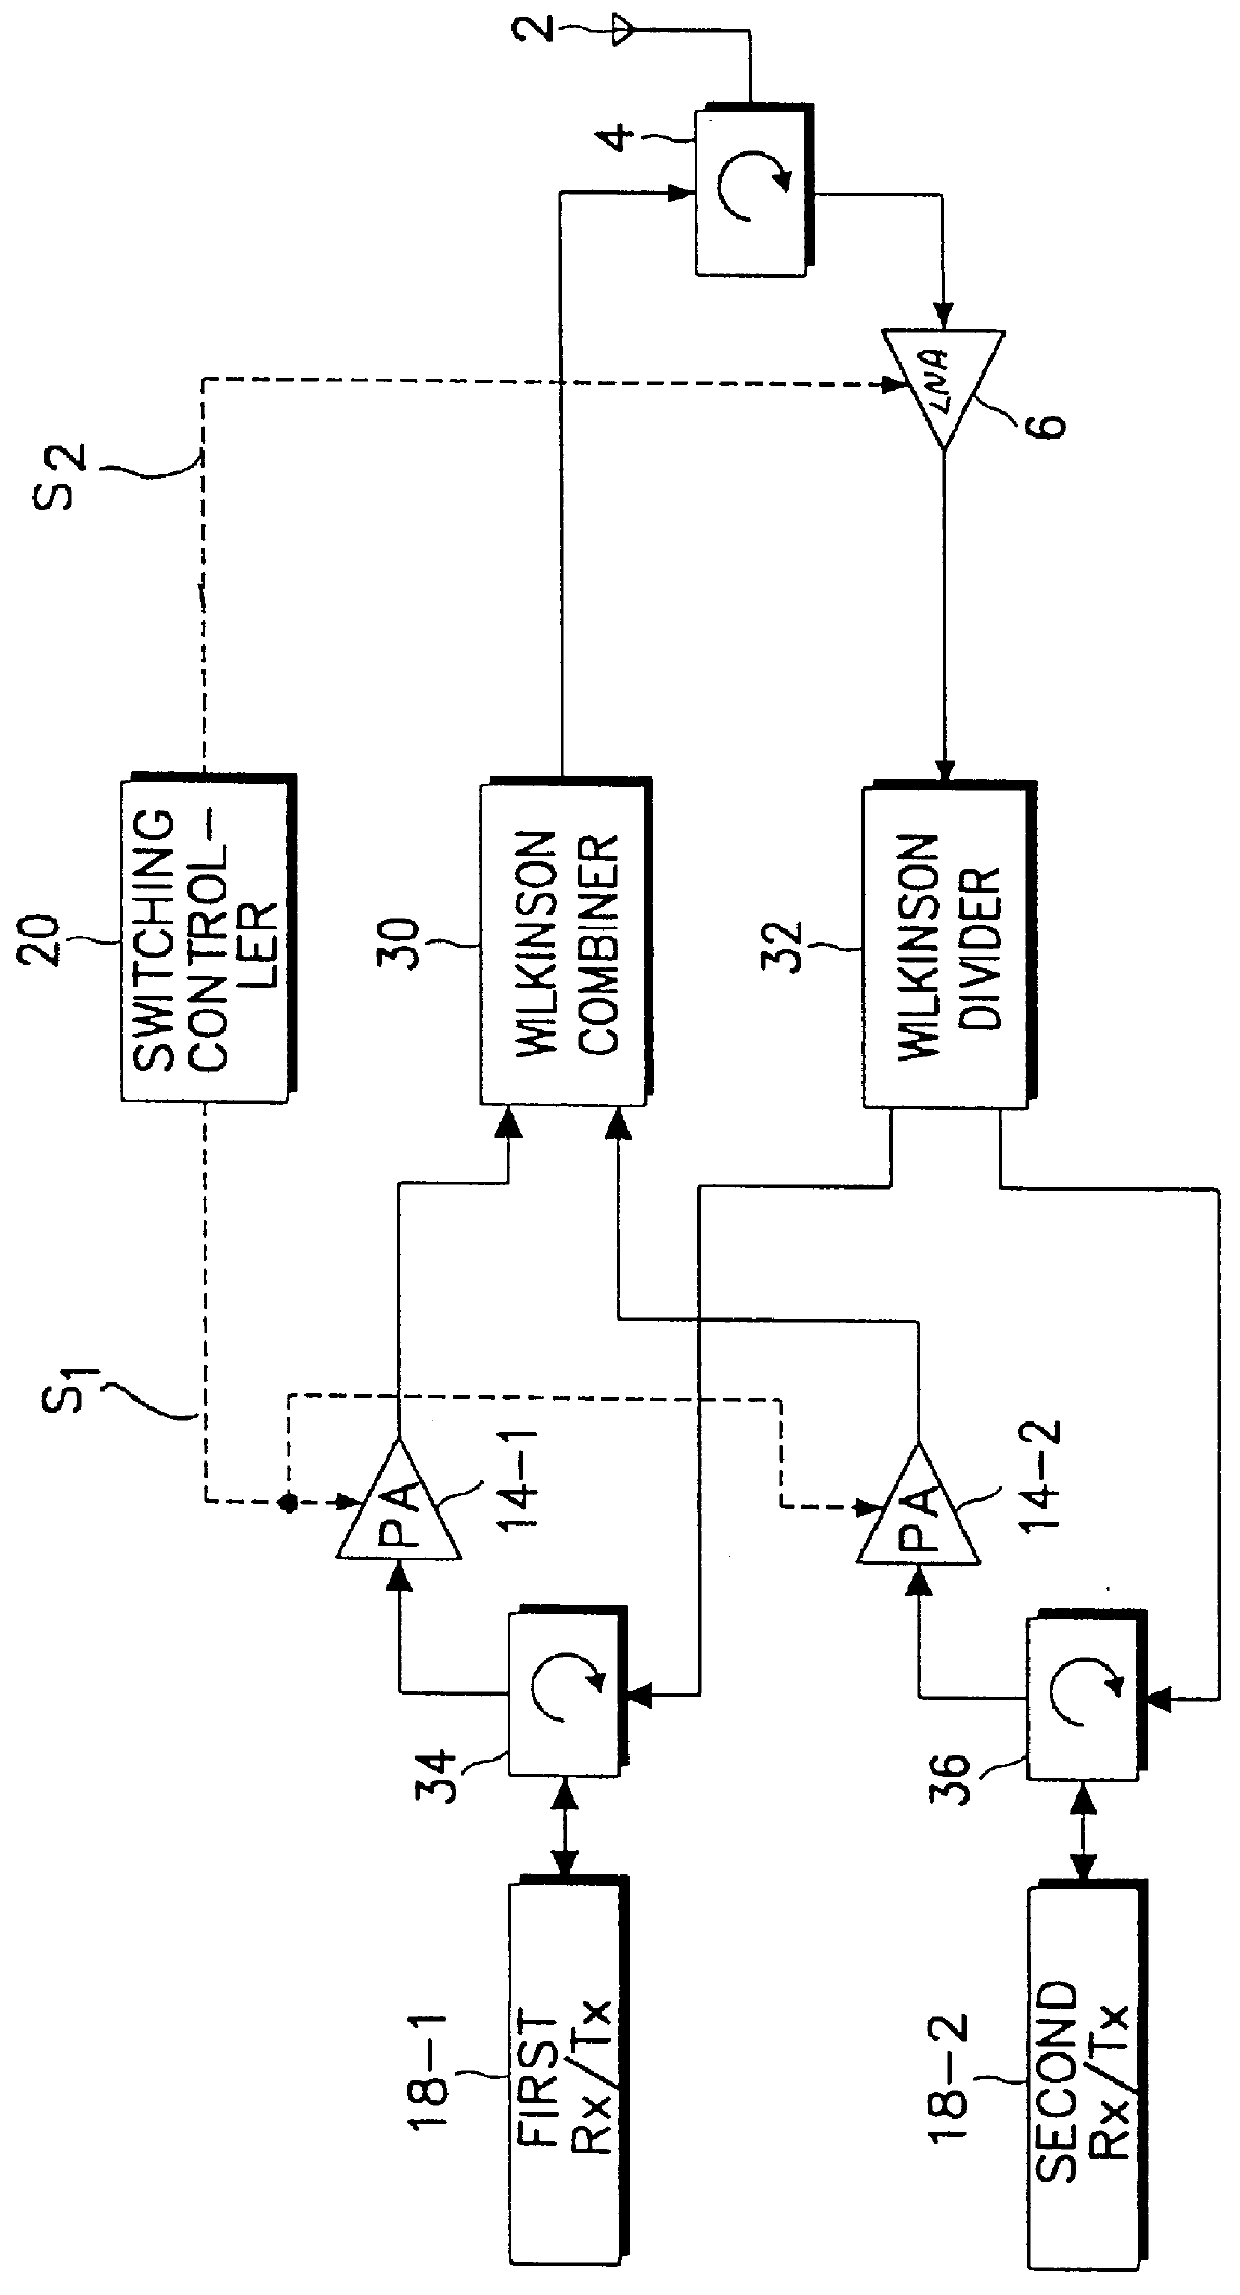 Transmitter/receiver for use in multichannel time division duplexing system providing isolation between transmission channels and reception channels